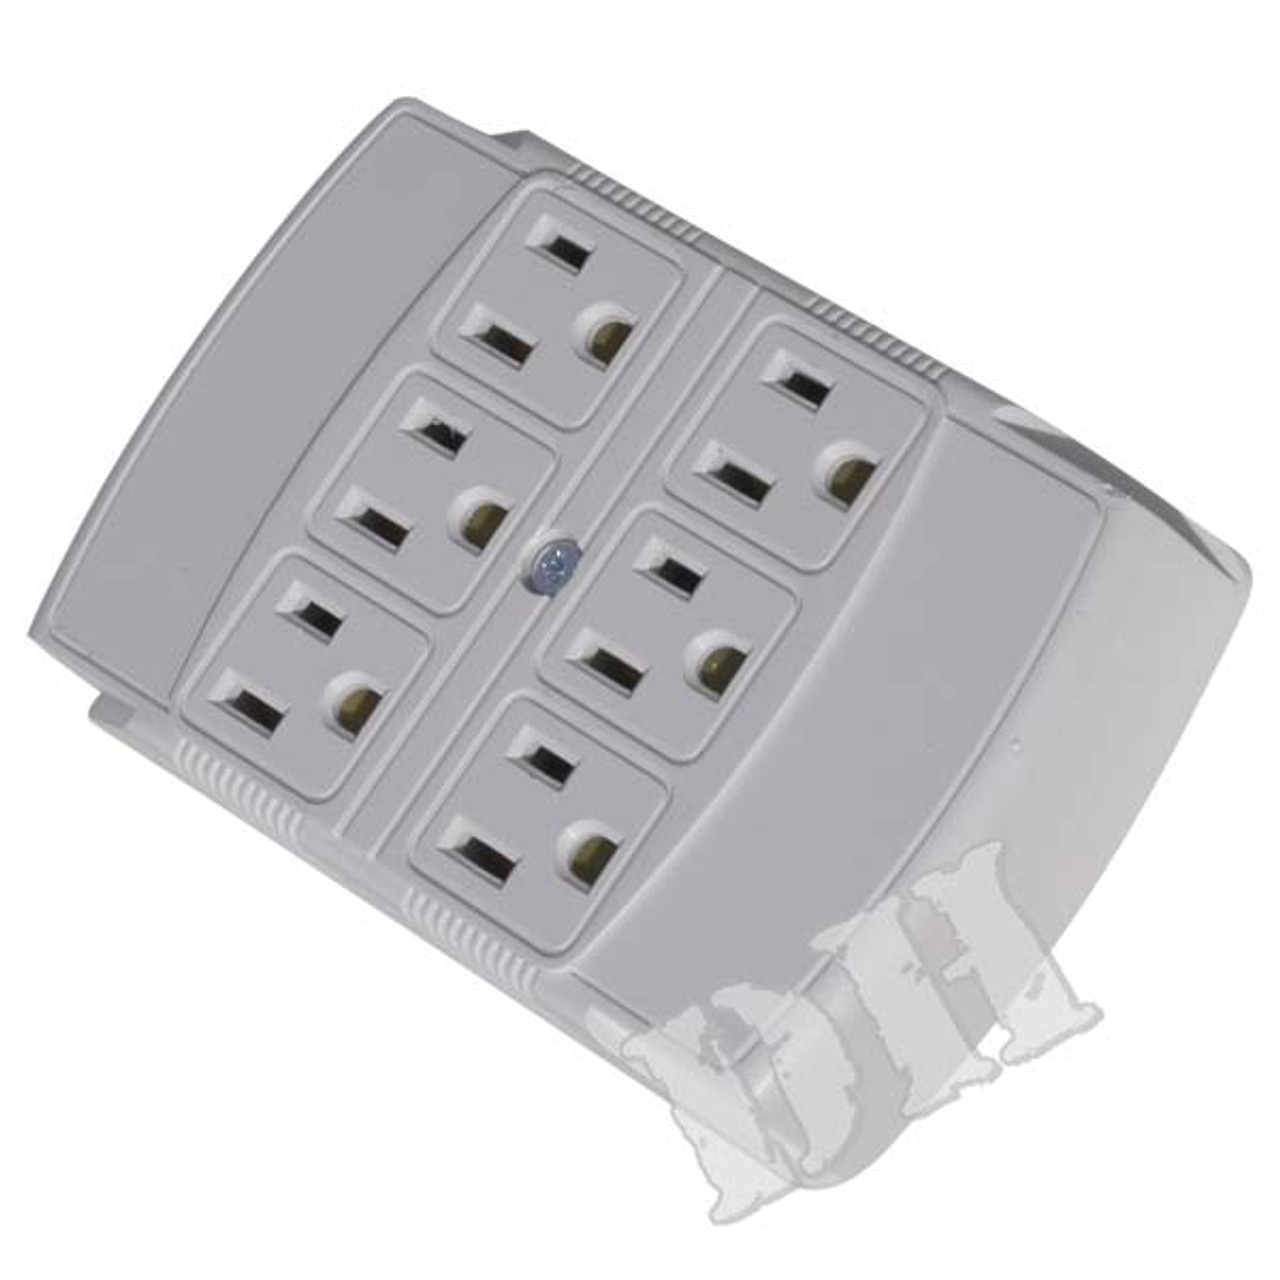 6 Outlet Power Tap